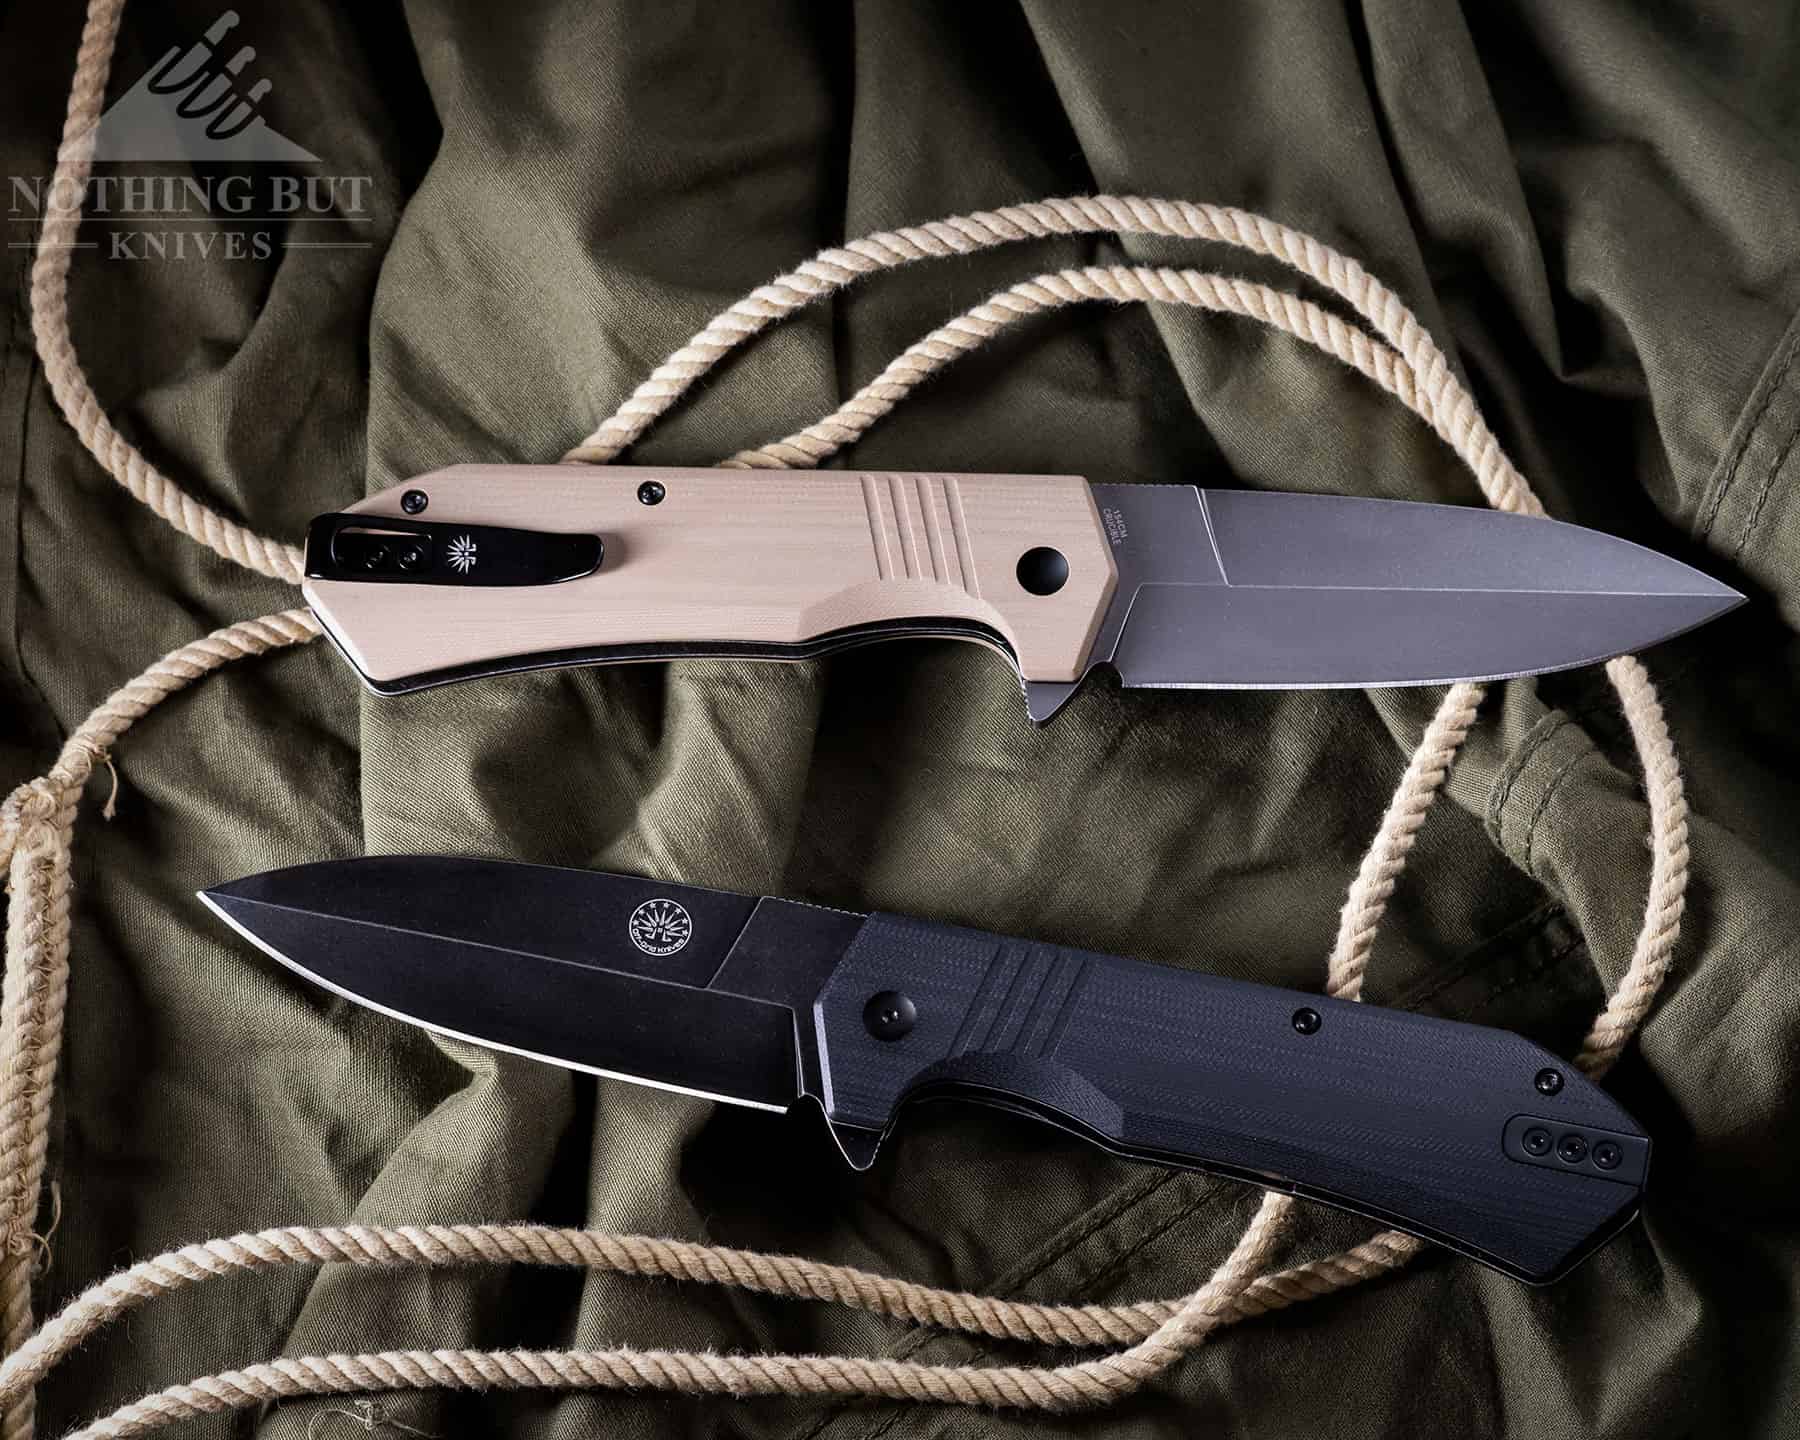 The Best Gifts for Knife Nuts: Our Favorite Bladecraft Accessories